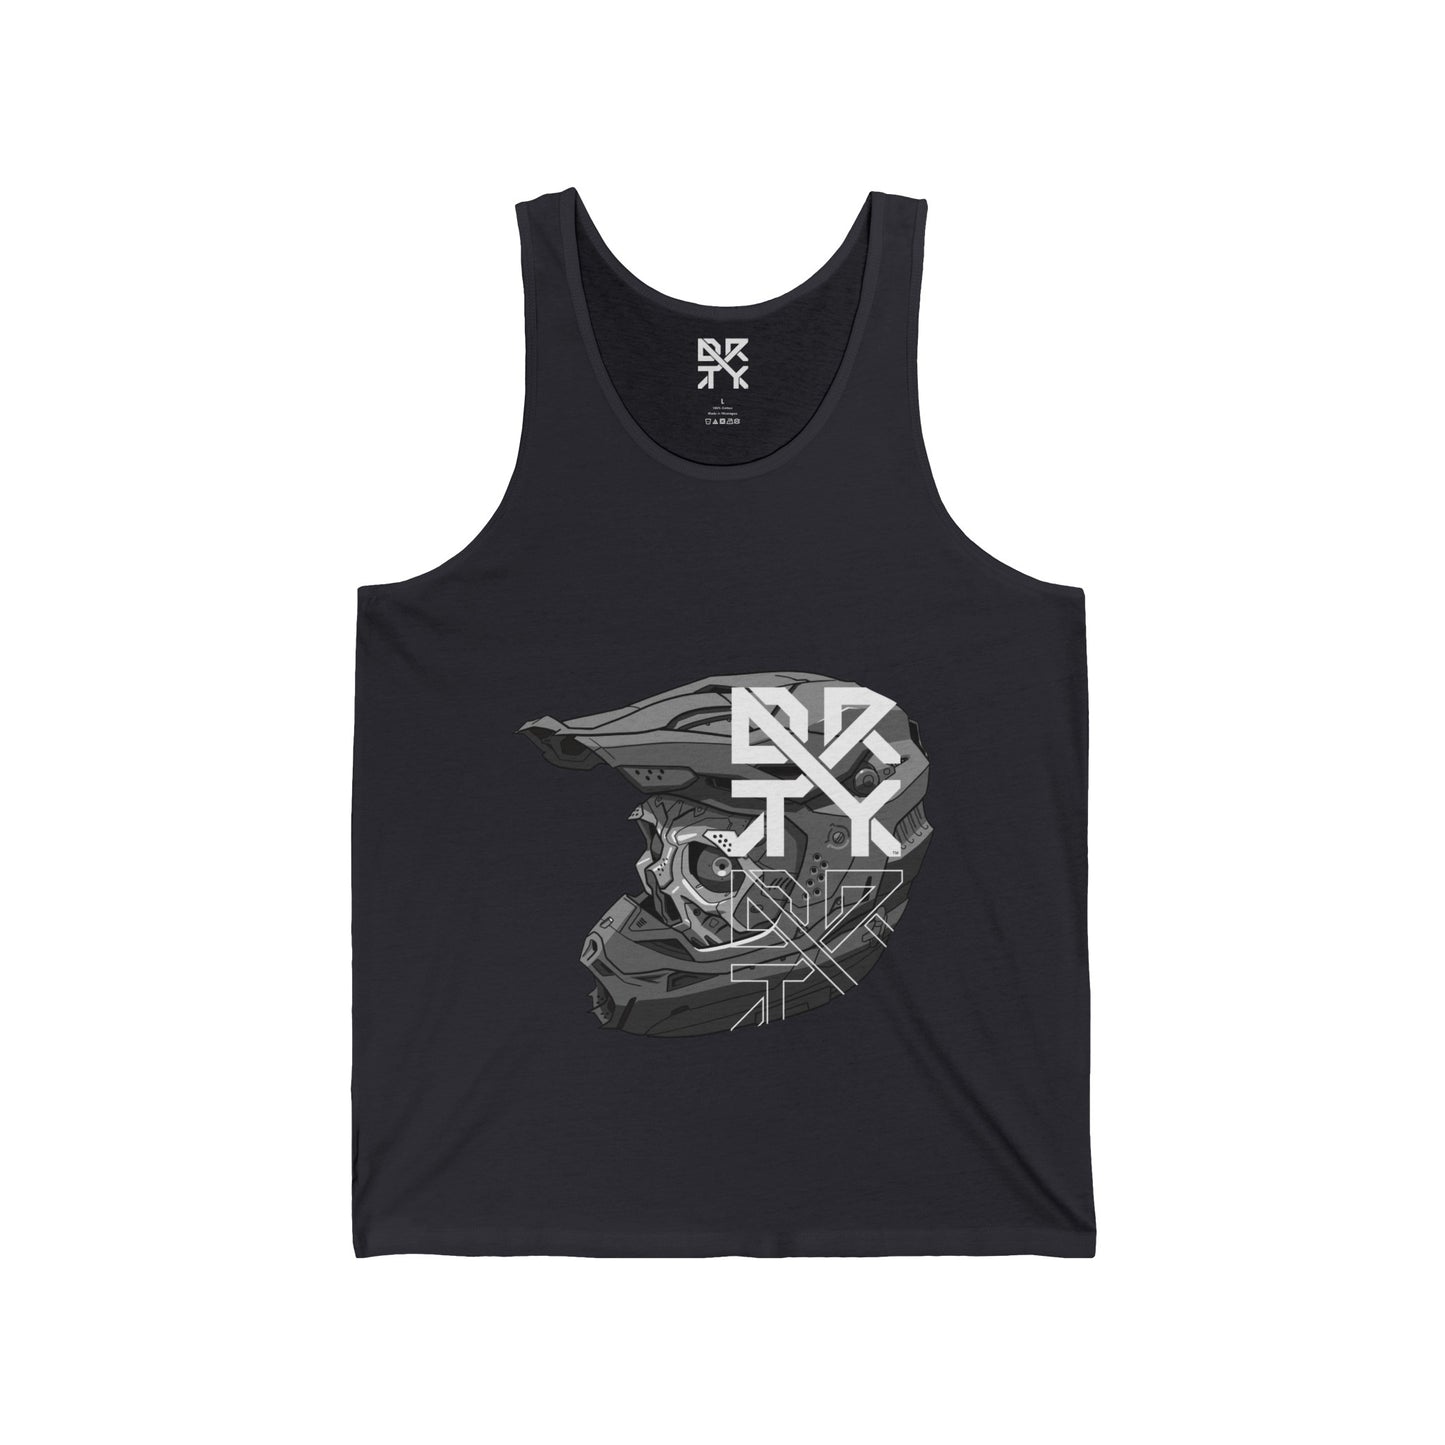 This image showcases the front view of a tank top with a cyber skull inside of a motocross helmet with a DRTY X logo on the helmet.